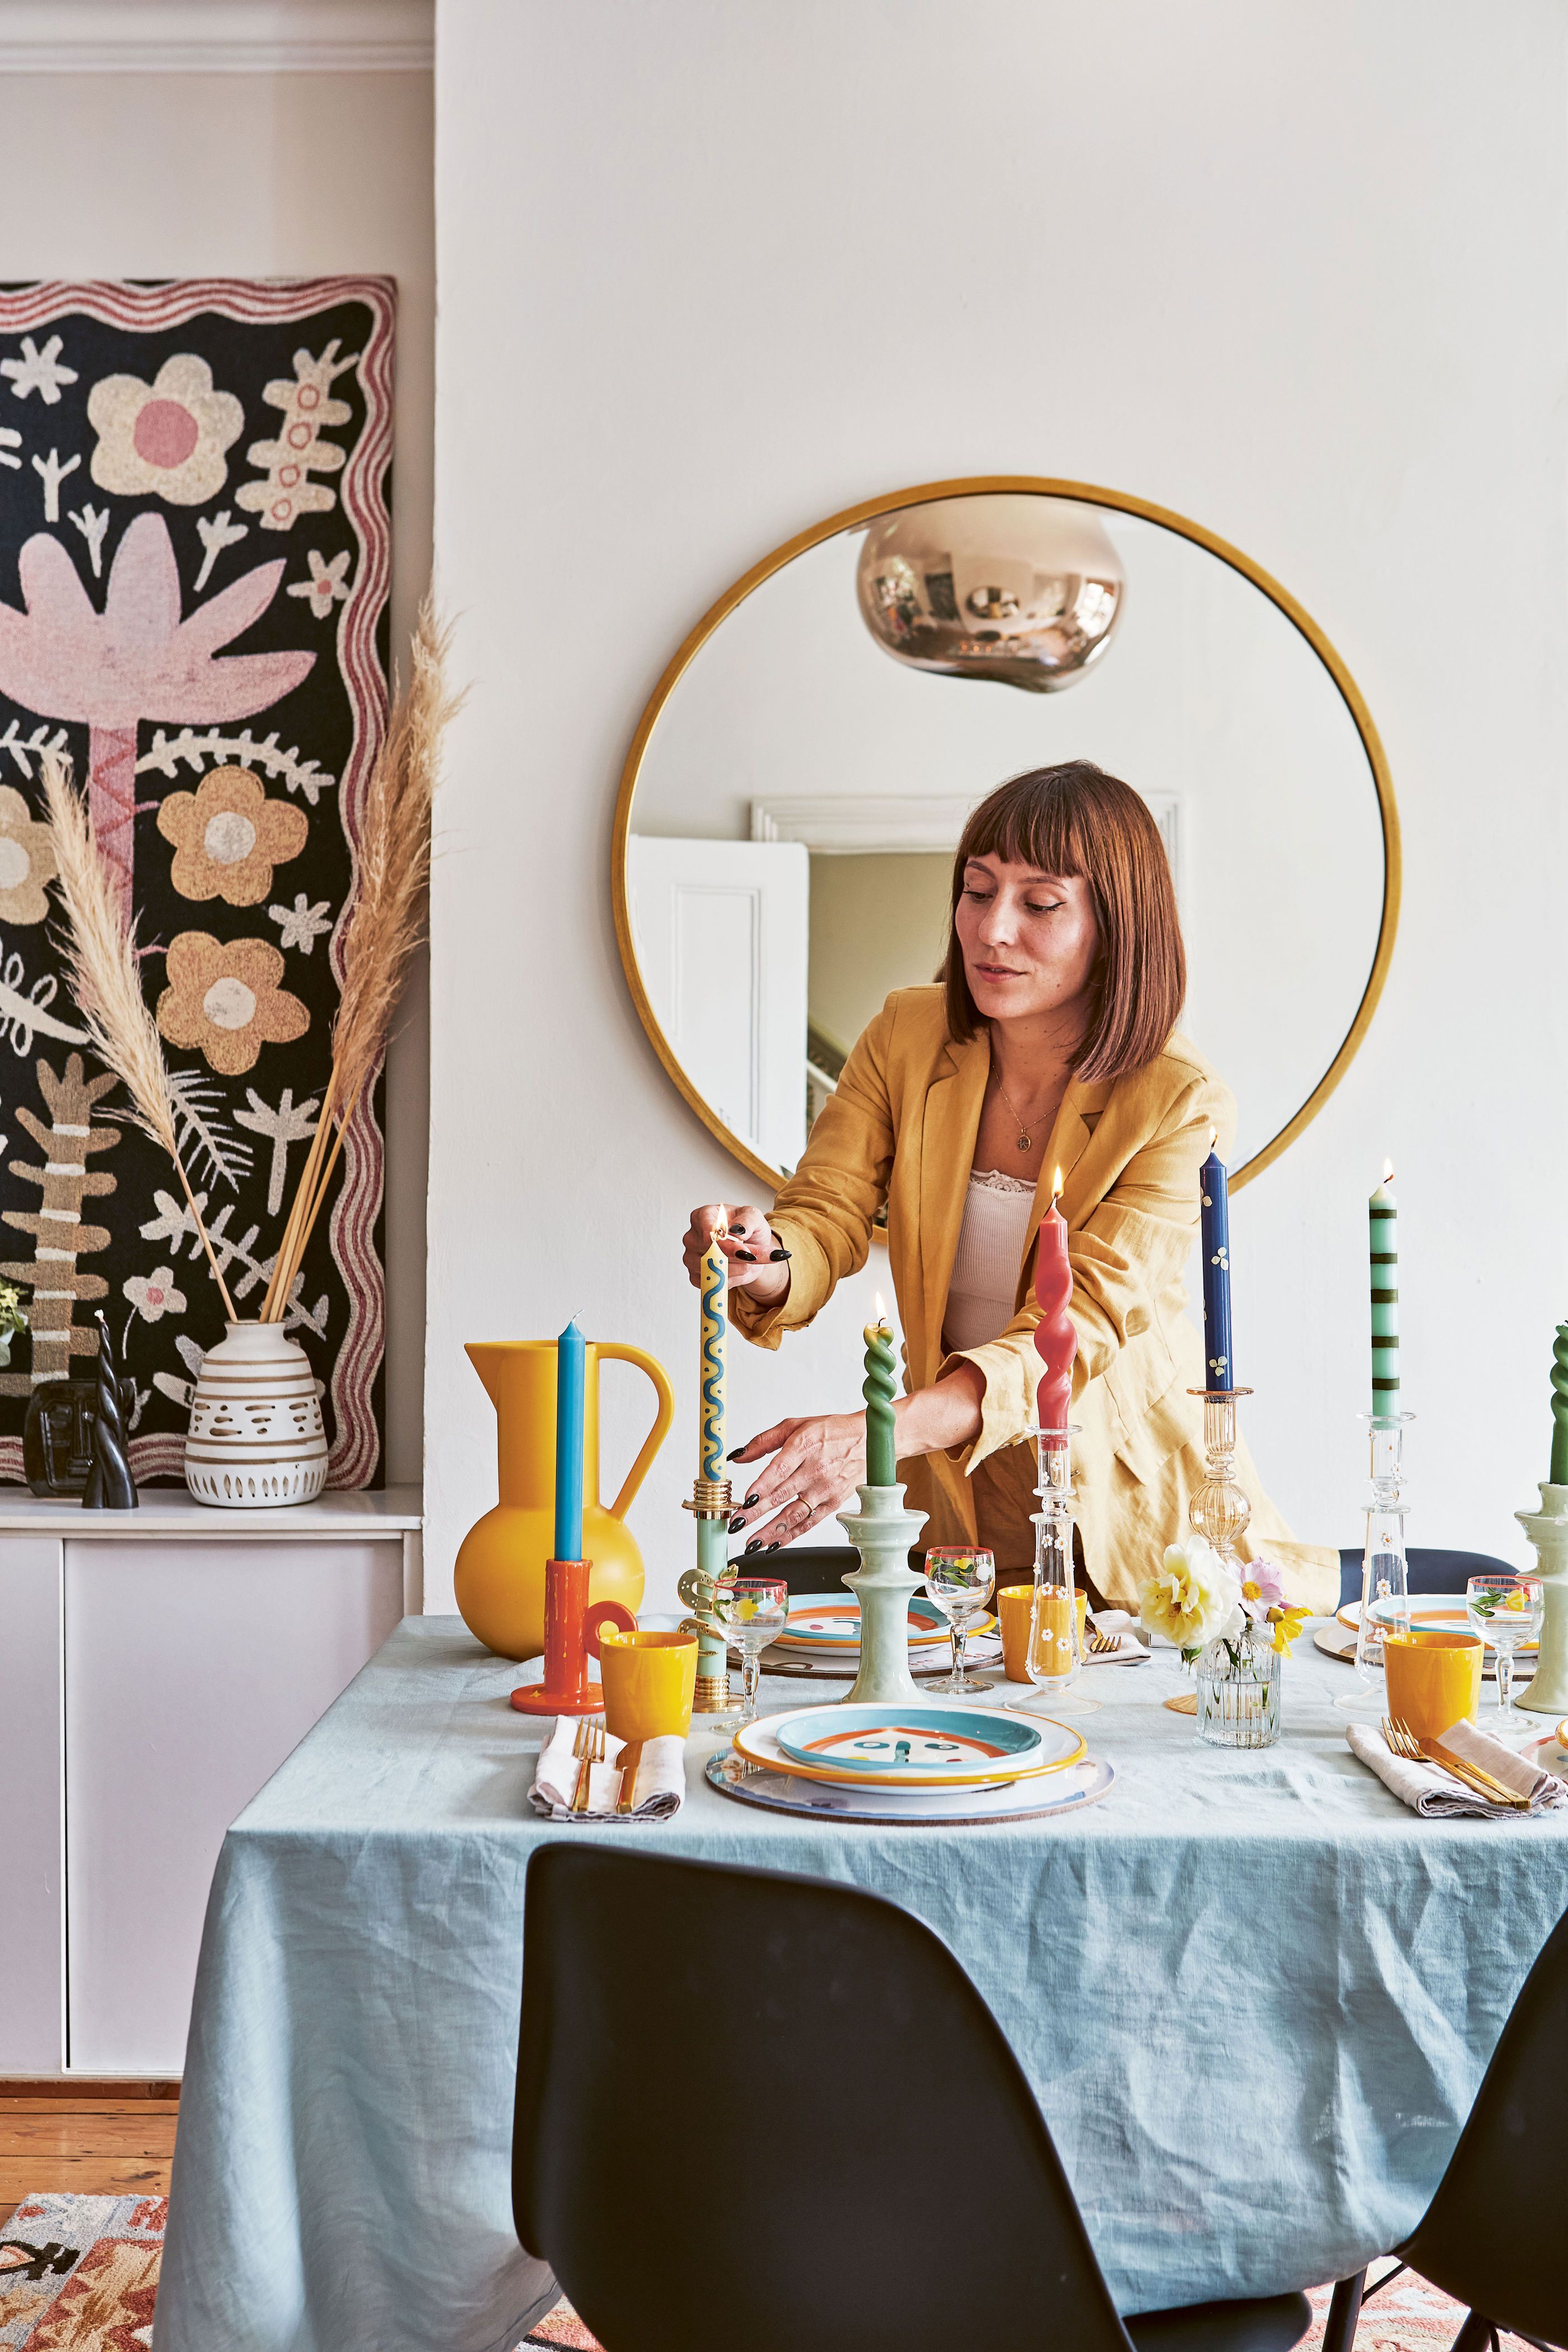 katherine ormerod: 'people tell me i’m mad to decorate a rental home — but it's worth the effort'